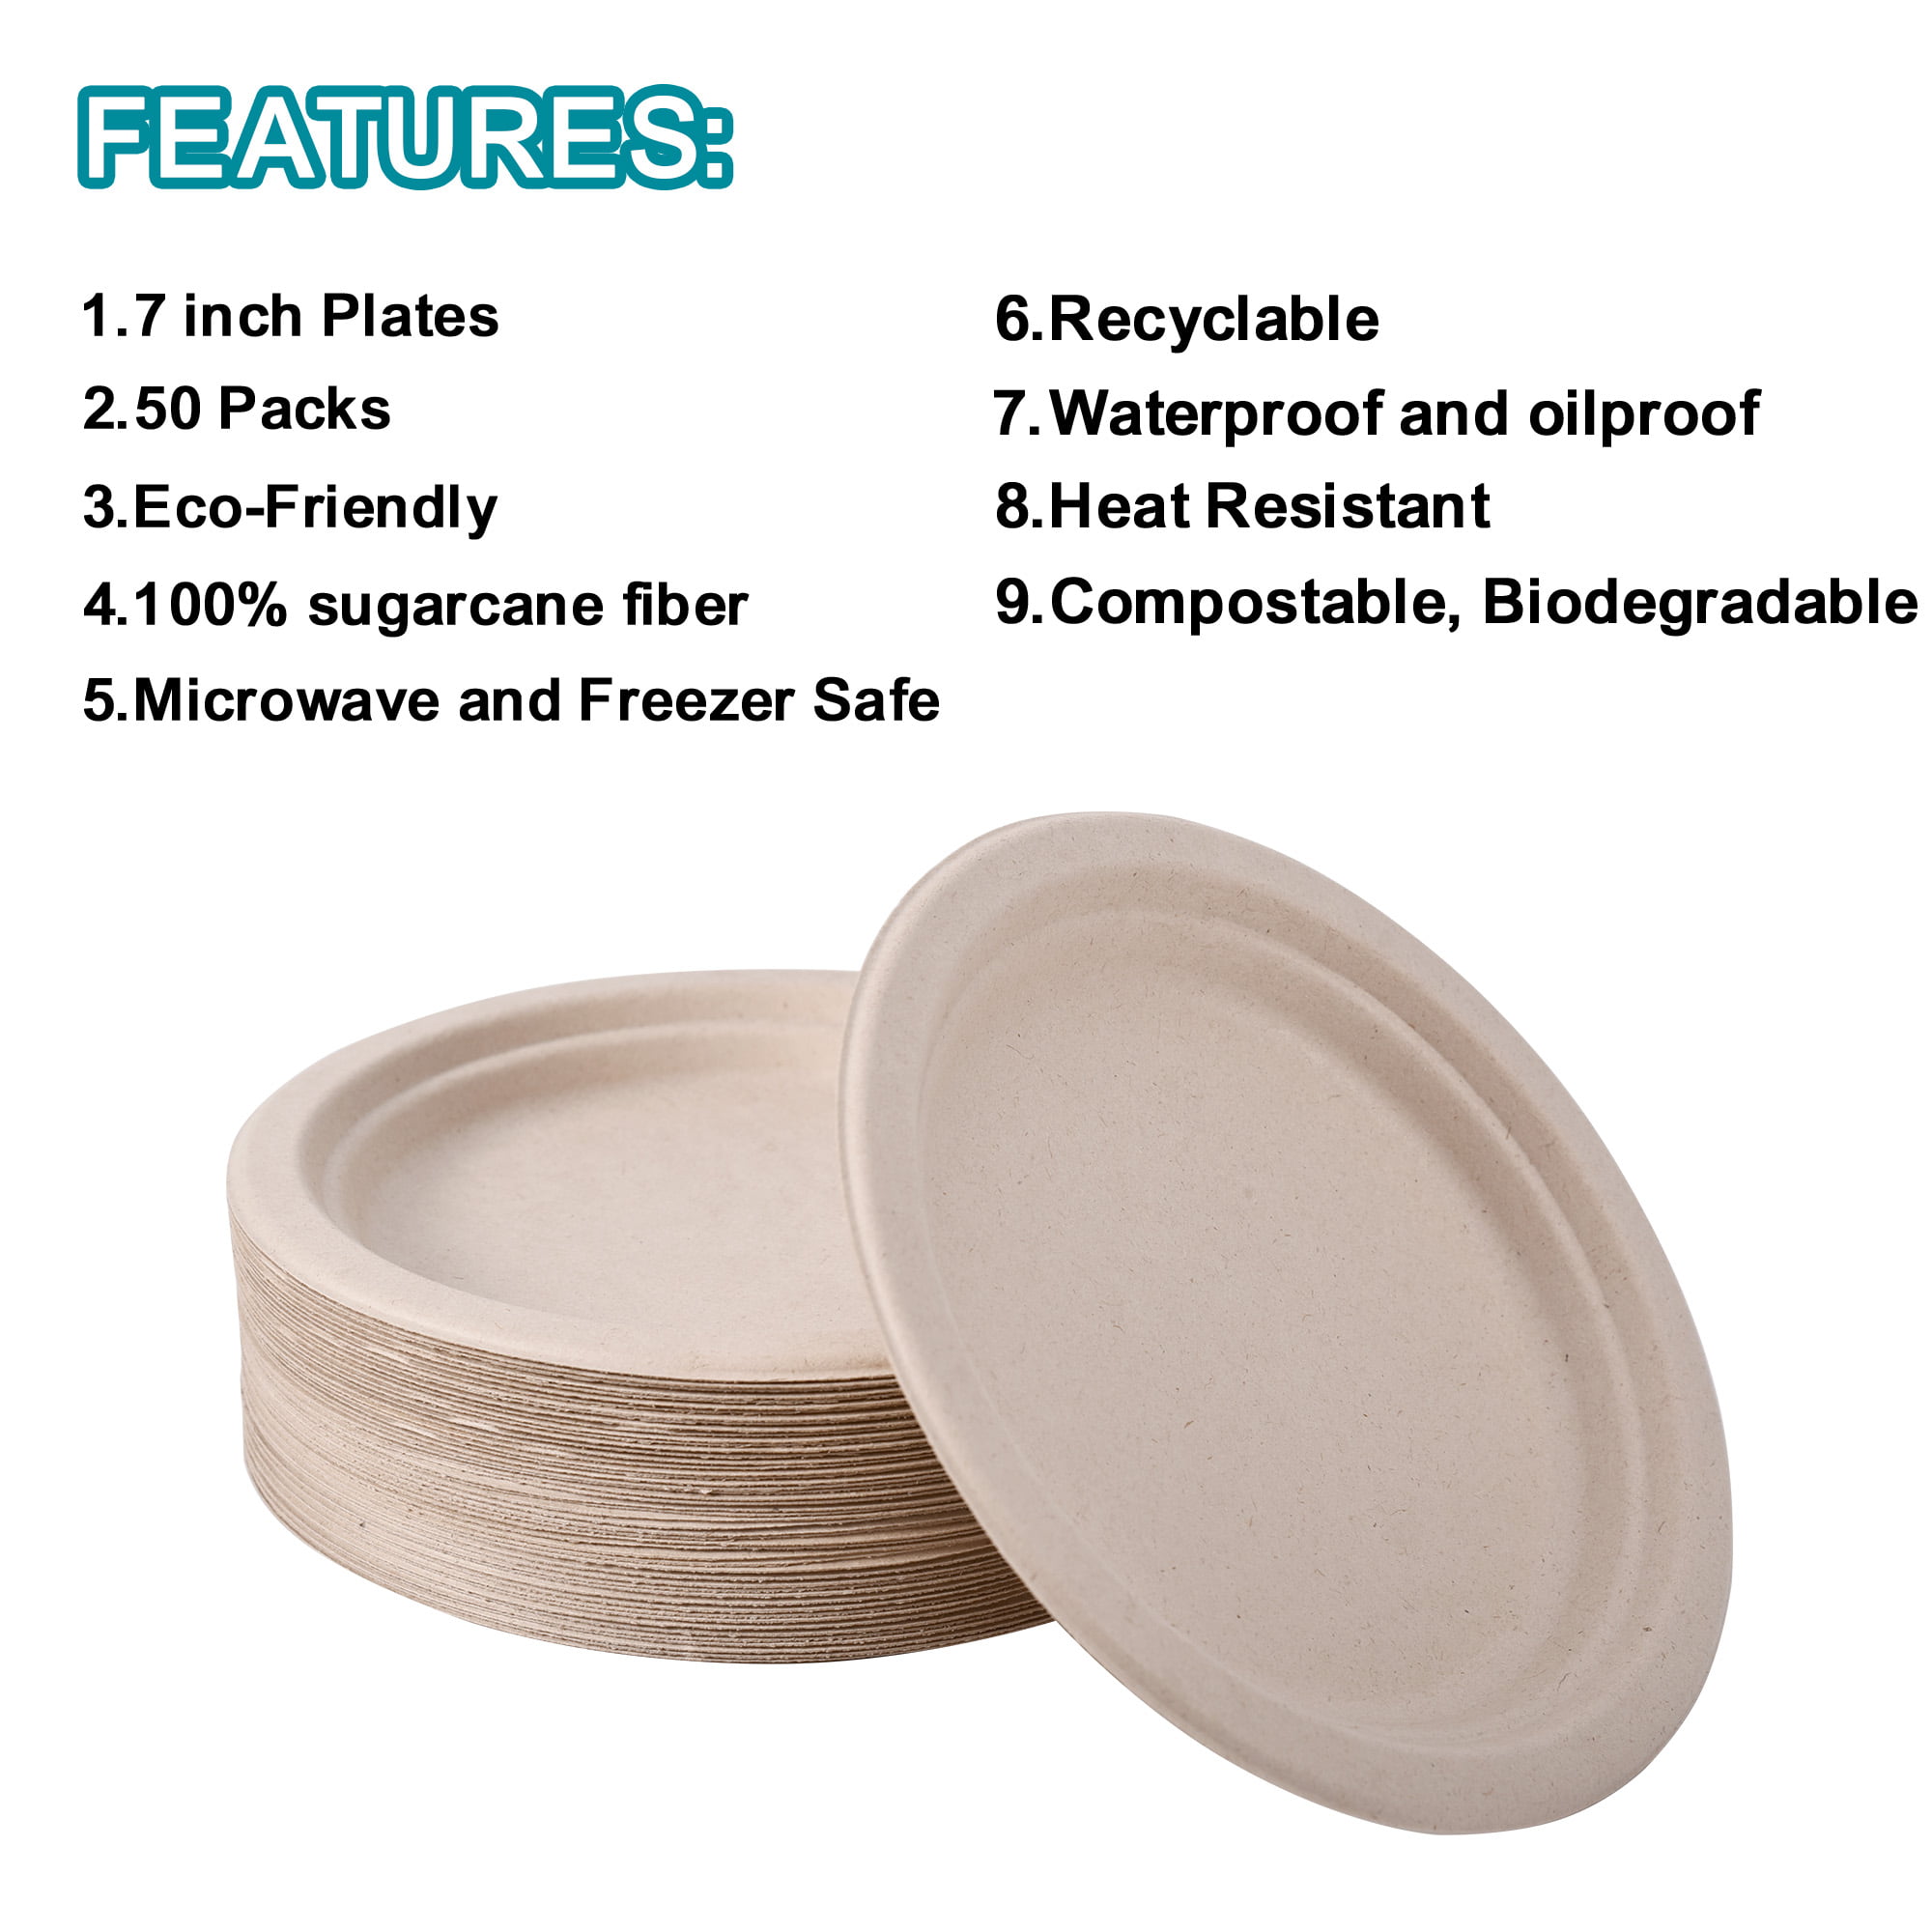 EconoHome 9 inch Compostable Plates 125-Pack - Eco-Conscious Disposable Plates Made of Bagasse or Sugarcane Fiber - Microwave, Refrigerator-Safe 